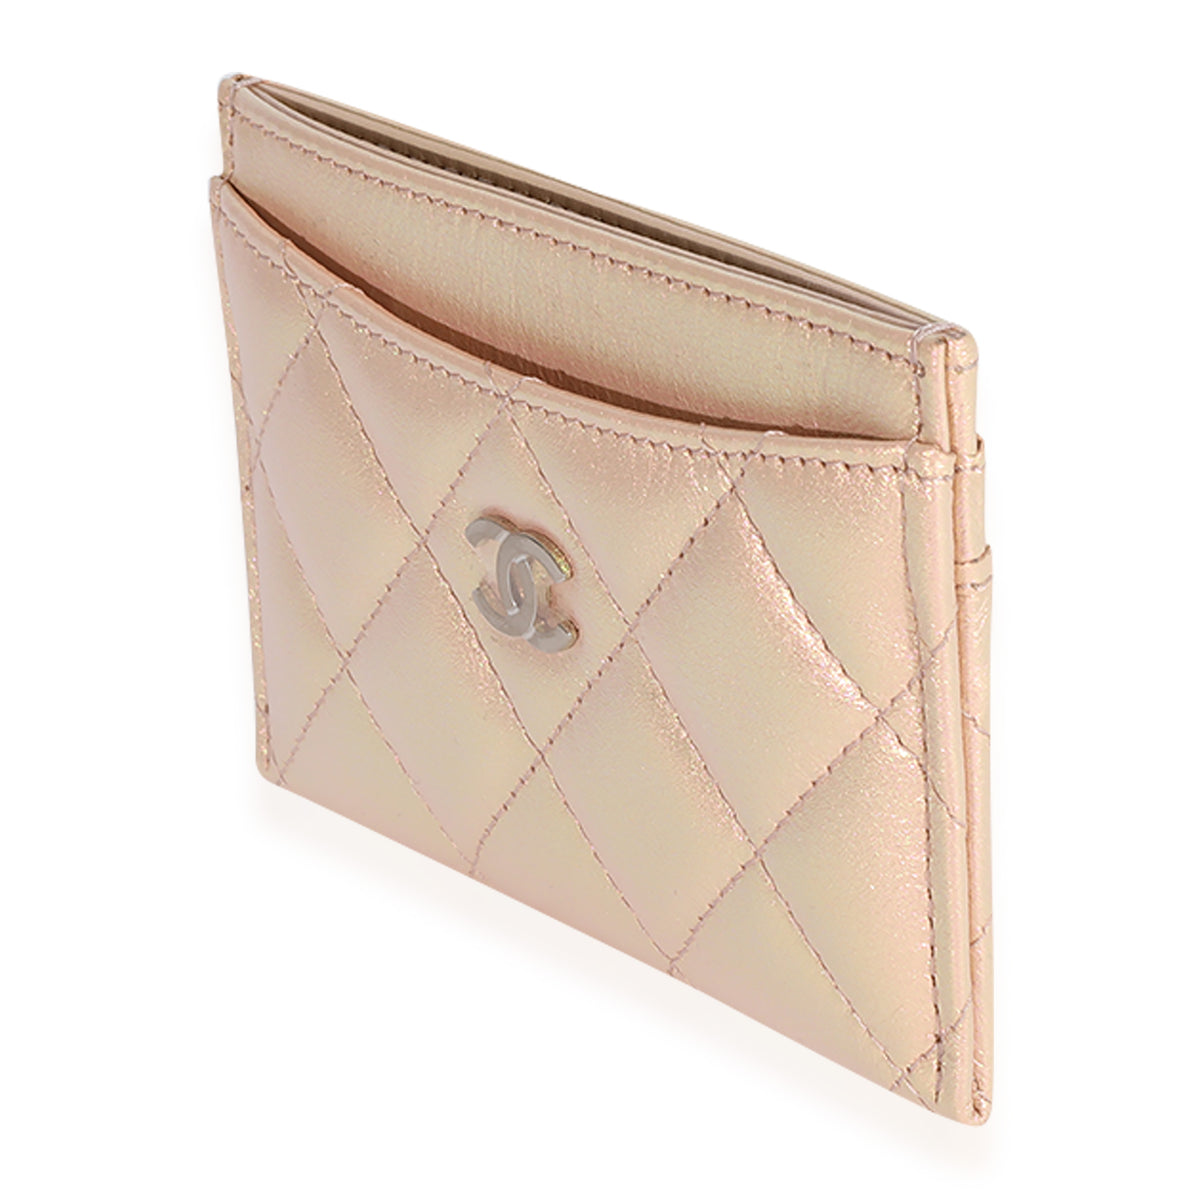 Chanel Caviar Quilted Flap Card Holder Wallet: Elegance in Every